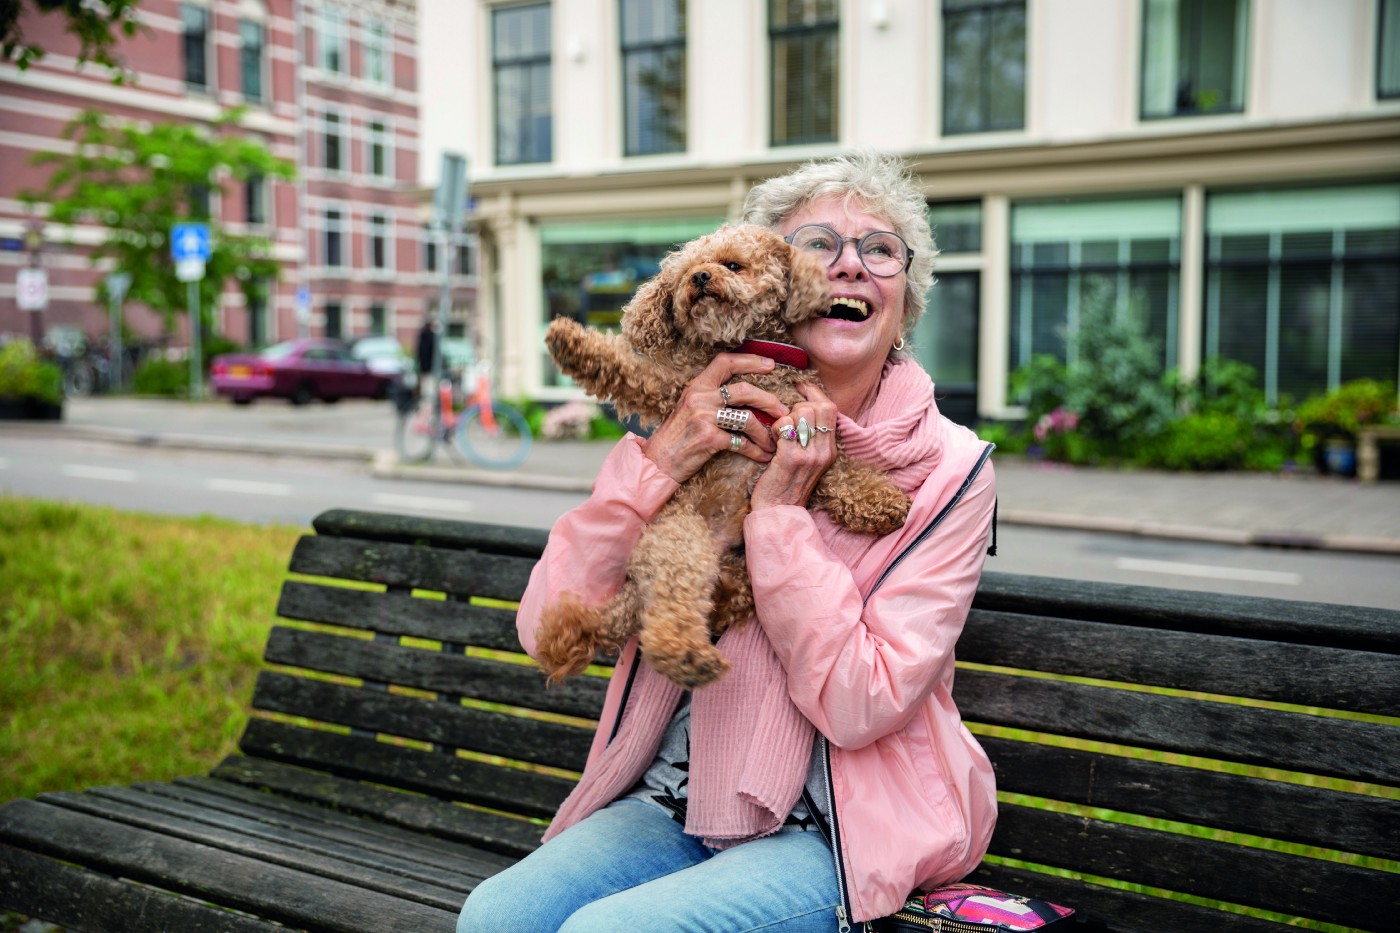 Christine and Sammy met through the OOPOEH Foundation, which connects elderly residents with families looking for dog sitters. 